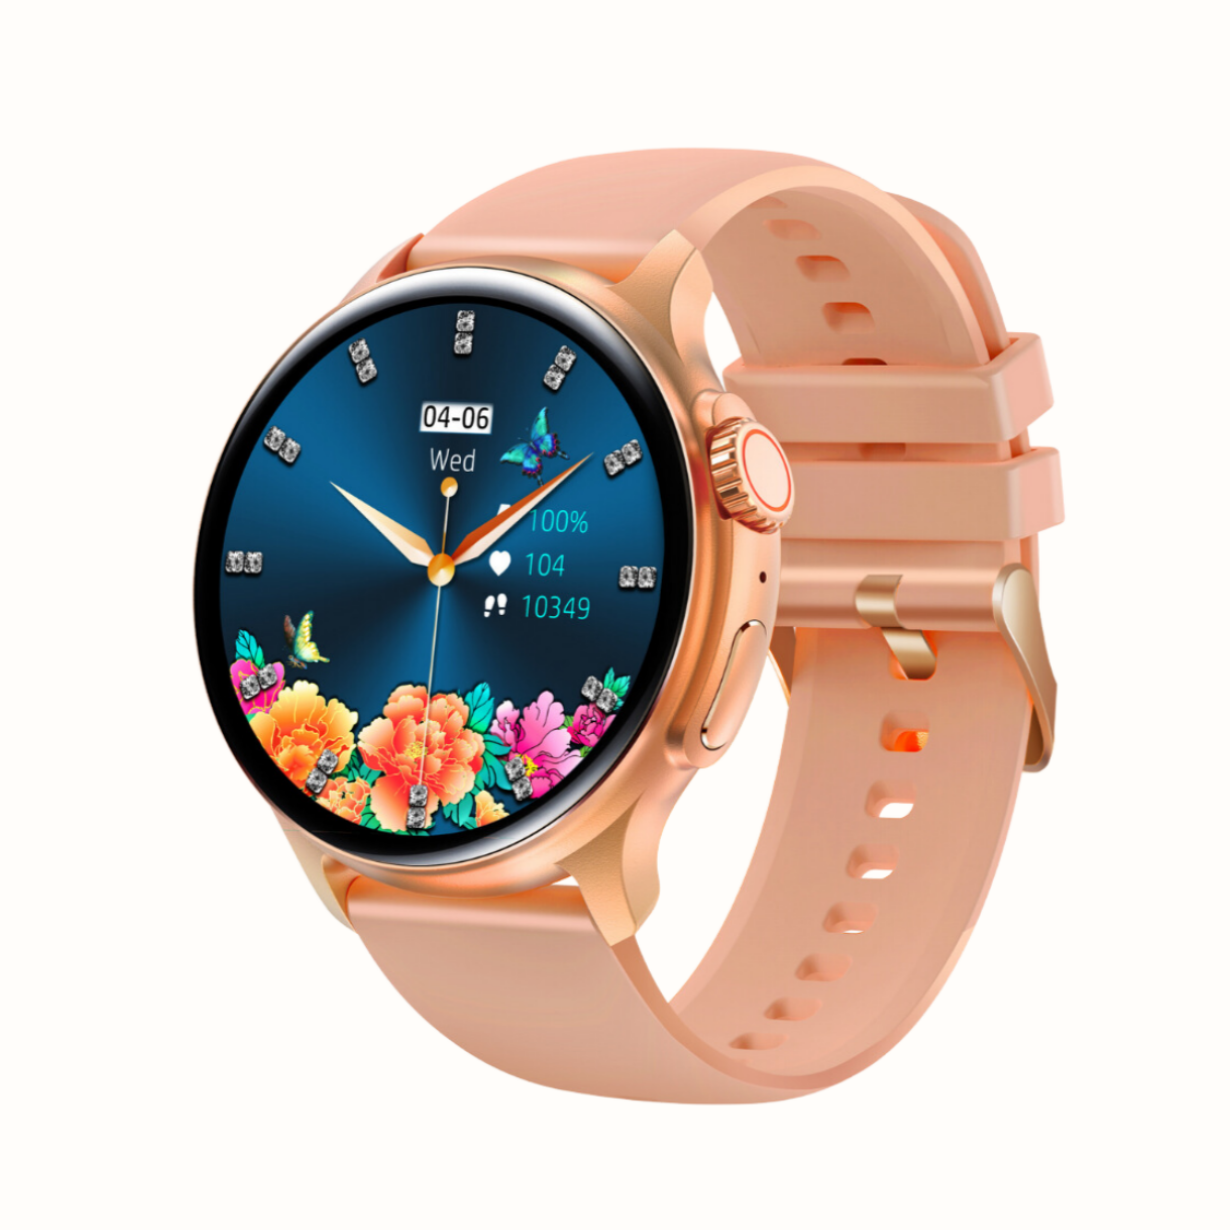 K58 Unisex Smartwatch, AMOLED Display, Setup with Android device, Setup with Apple Device, Water resistance - IP68, Best Smart Watch, 2023, Track Activity,Track WOmens Health, Pedometer, Calorie Monitor, Sleep Tracking, Heart Rate Monitor, Blood Oxygen Monitor- Spo2, Multisport Mode, Color- Rose Gold